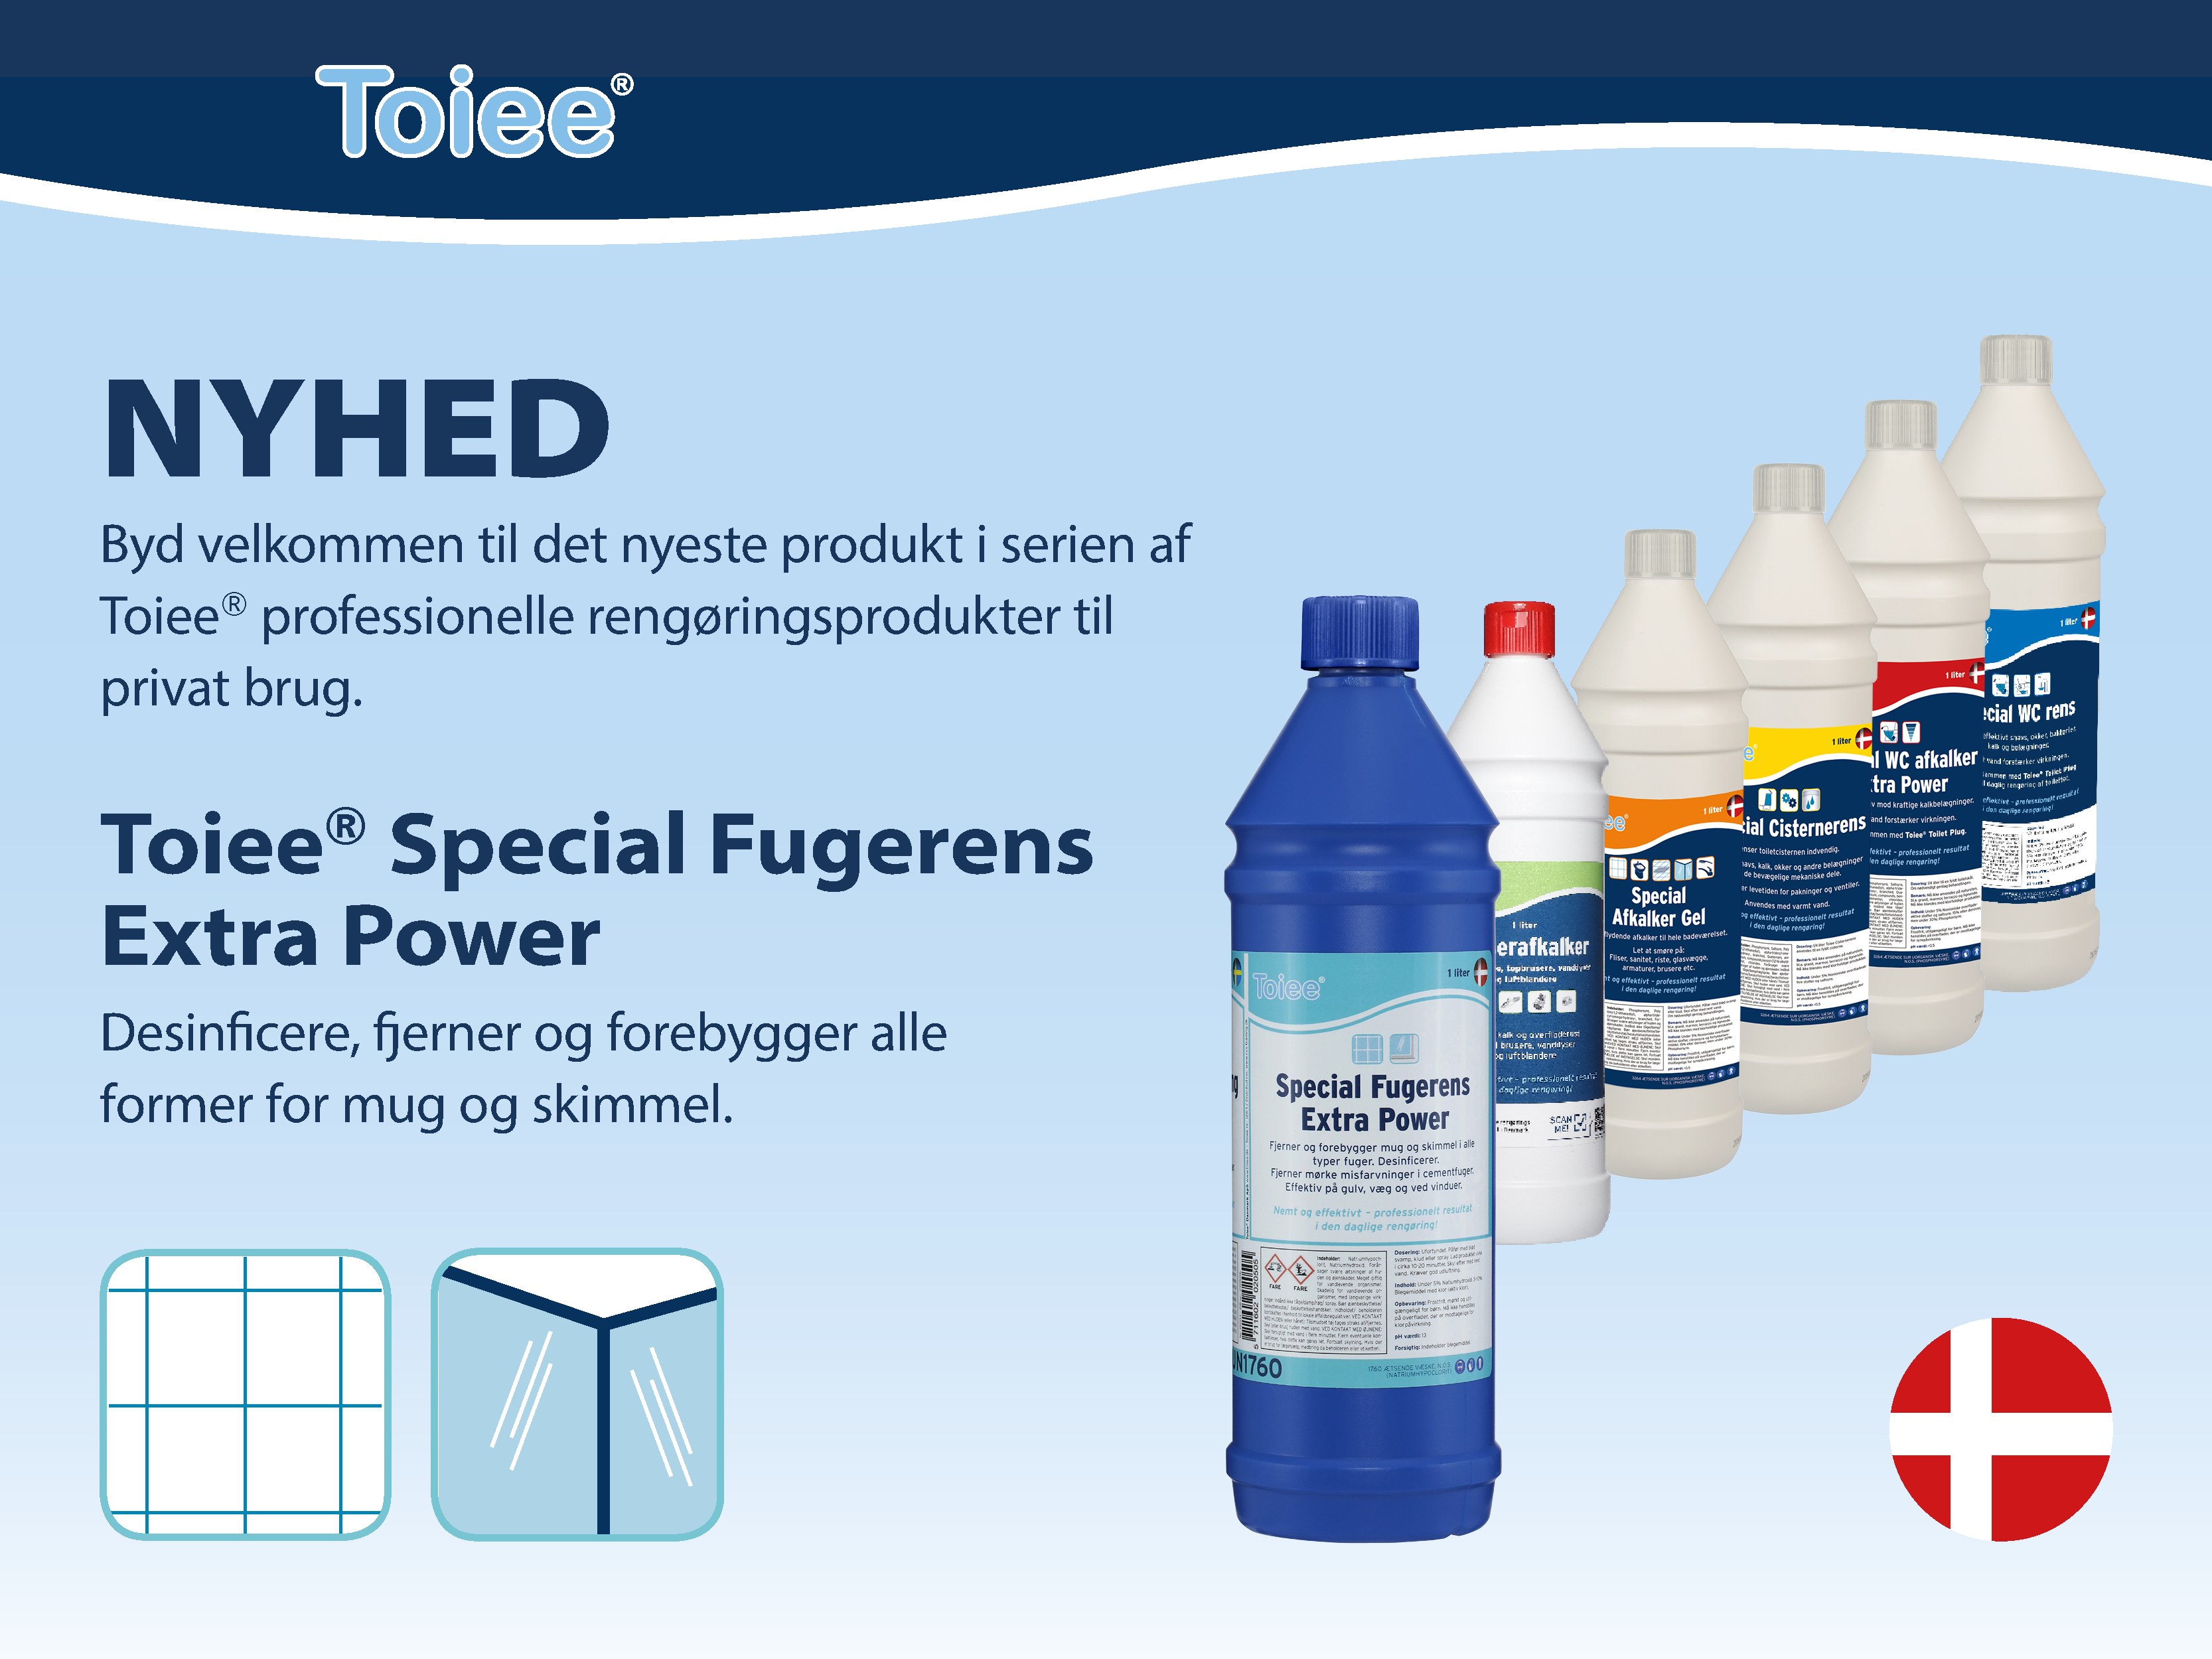 Toiee® Special Fugerens Extra Power